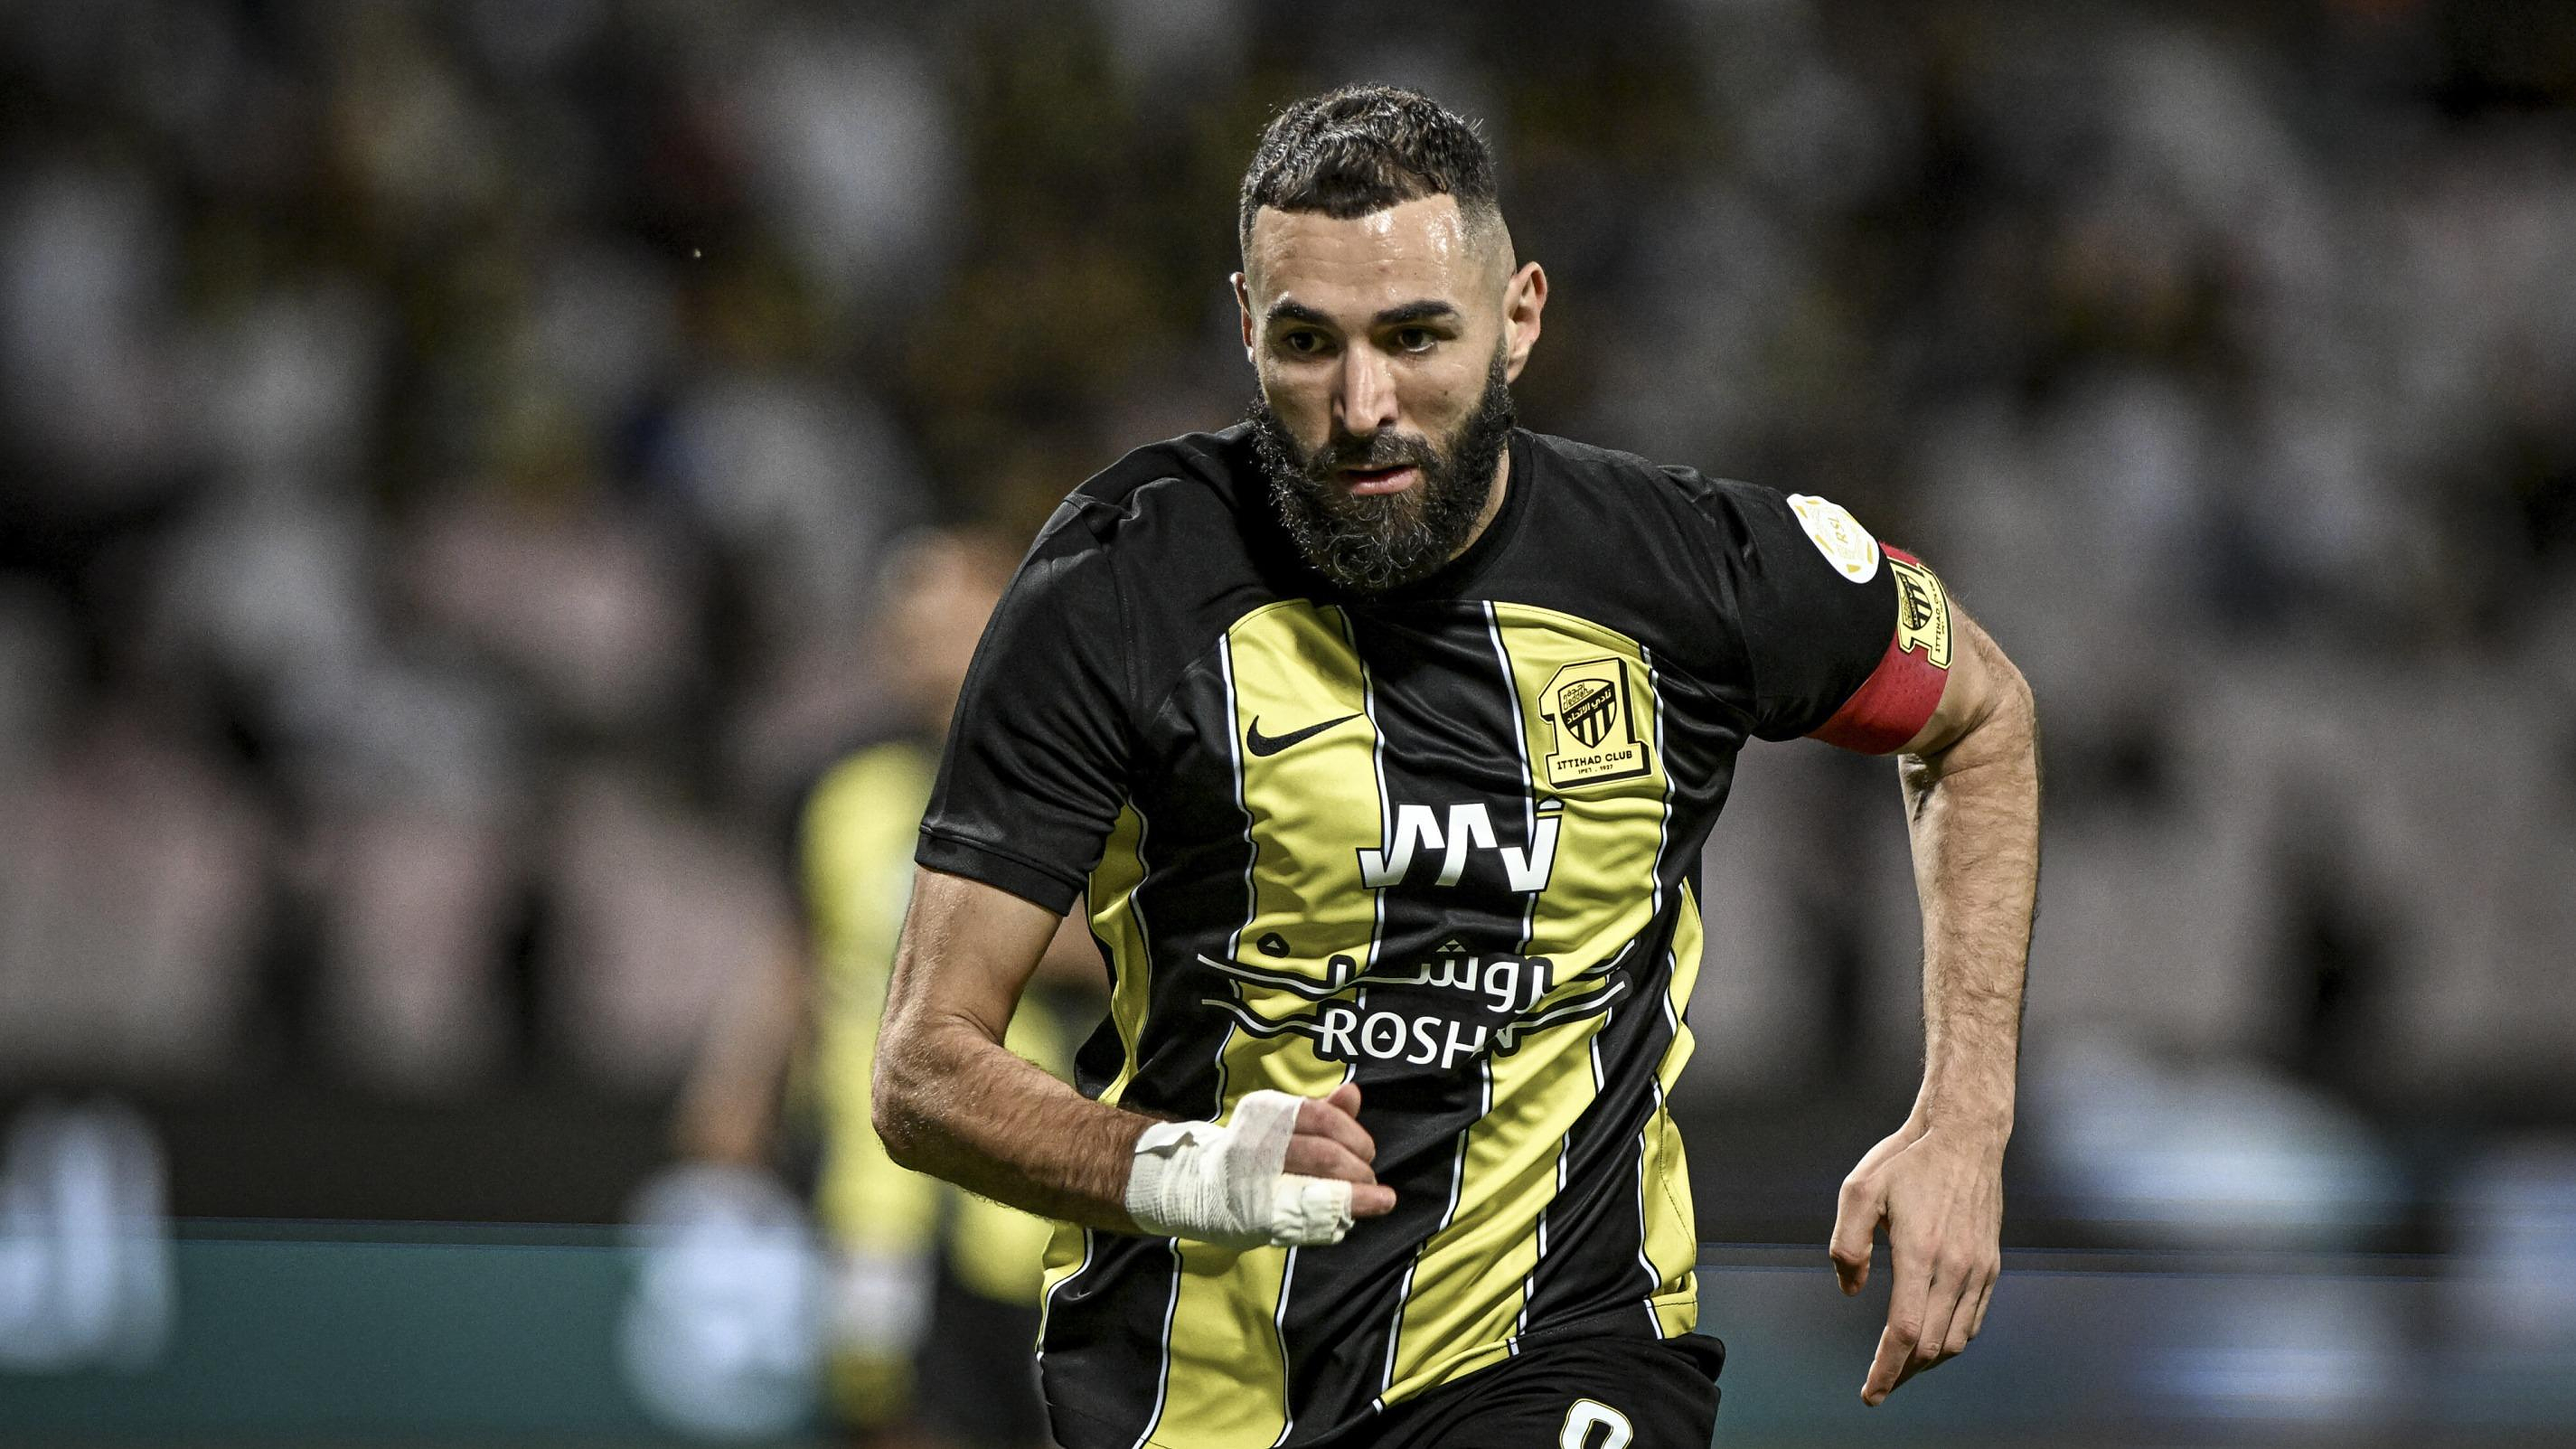 Football: “It’s a crime”, Benzema’s brother angry with Al Ittihad coach